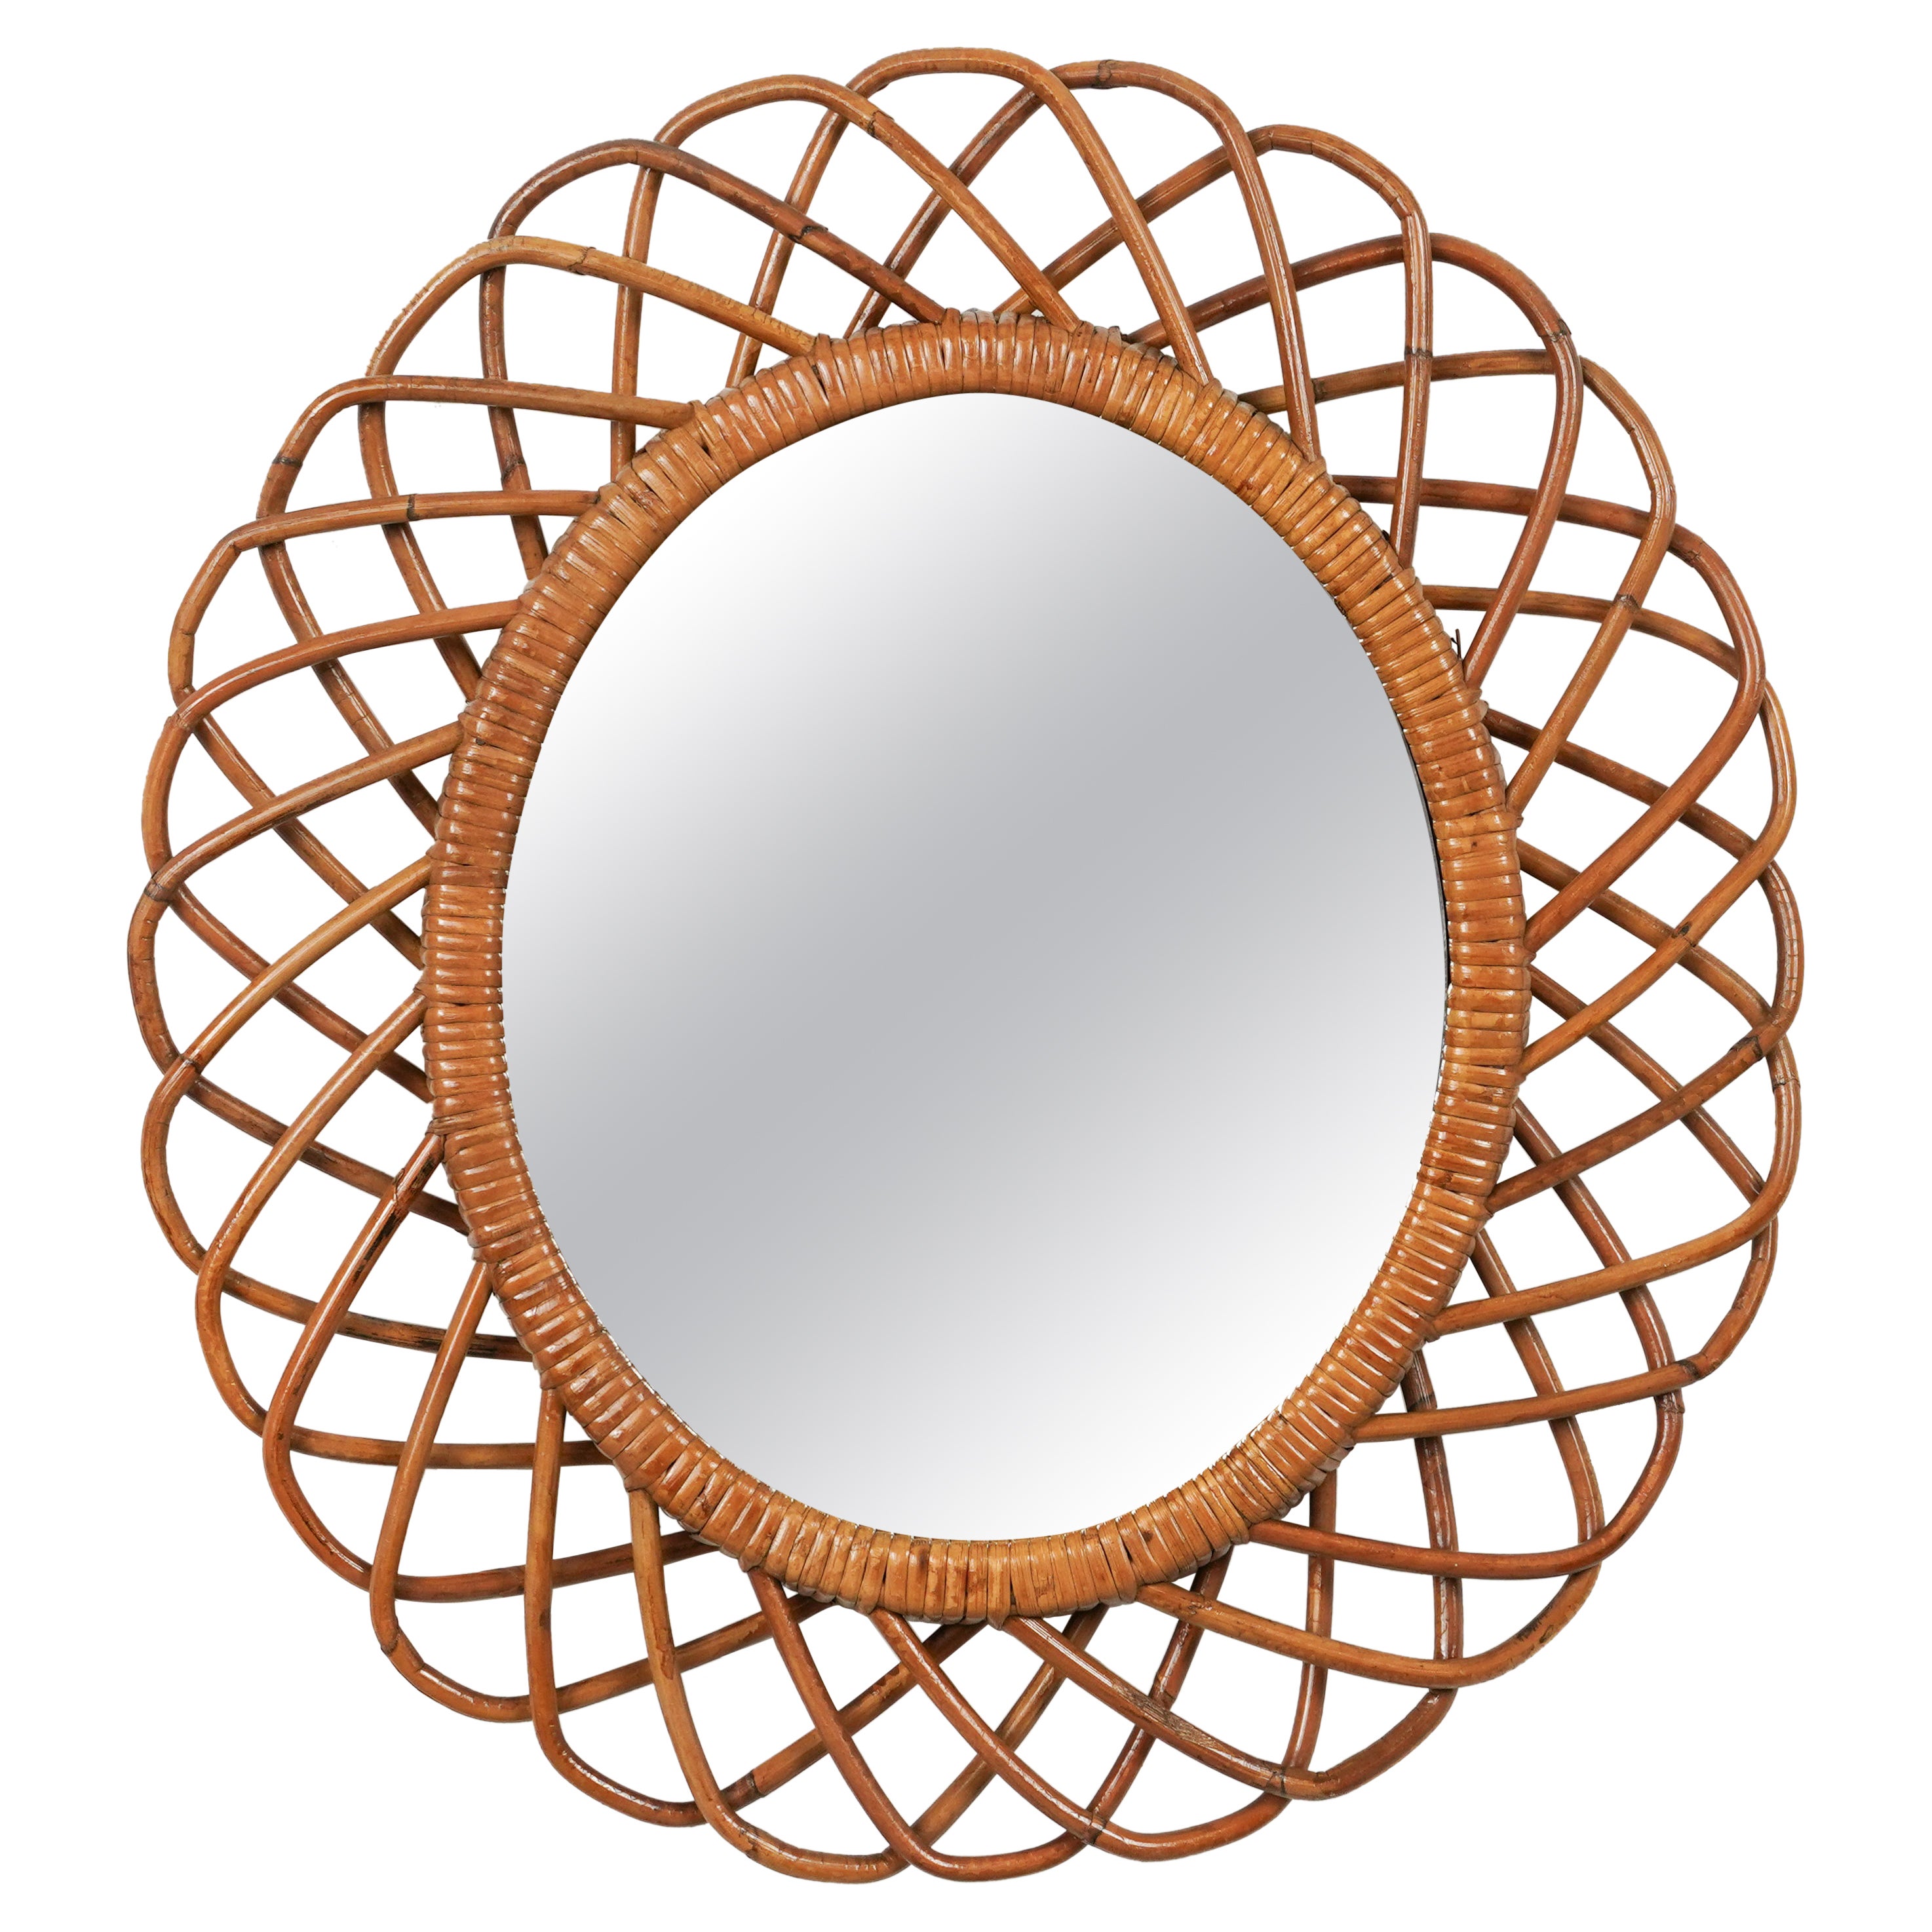 Midcentury Rattan and Bamboo Oval Wall Mirror, Italy 1960s